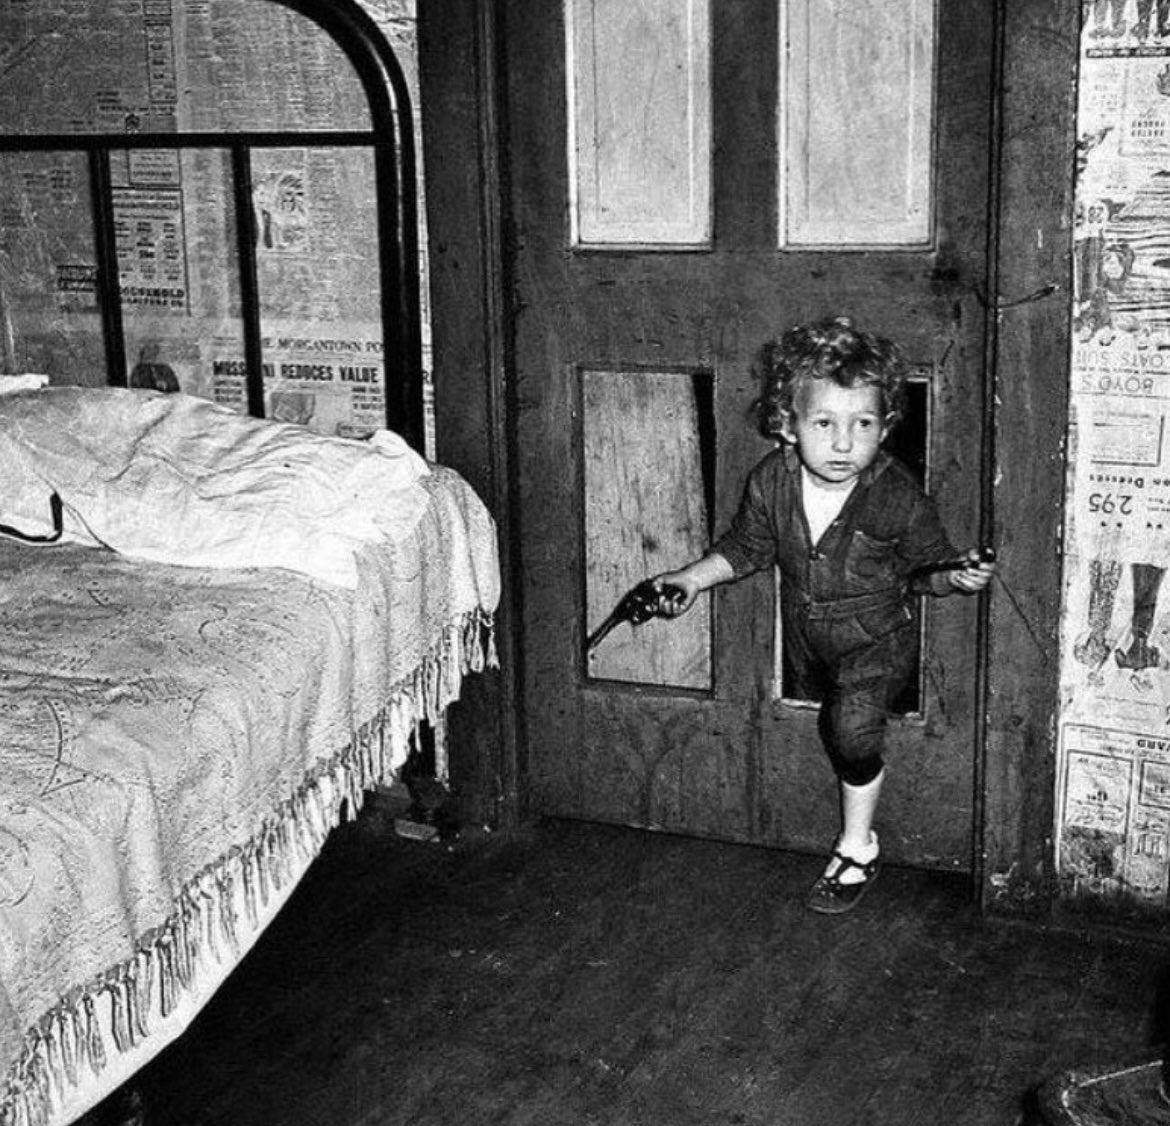 The photograph captured by Marion Post Wolcott in 1938 depicts a coal miner's child in a West Virginia home. The child is shown using a cat hole, which was a small opening in the floor used as a makeshift toilet. The image portrays the challenging living conditions and poverty